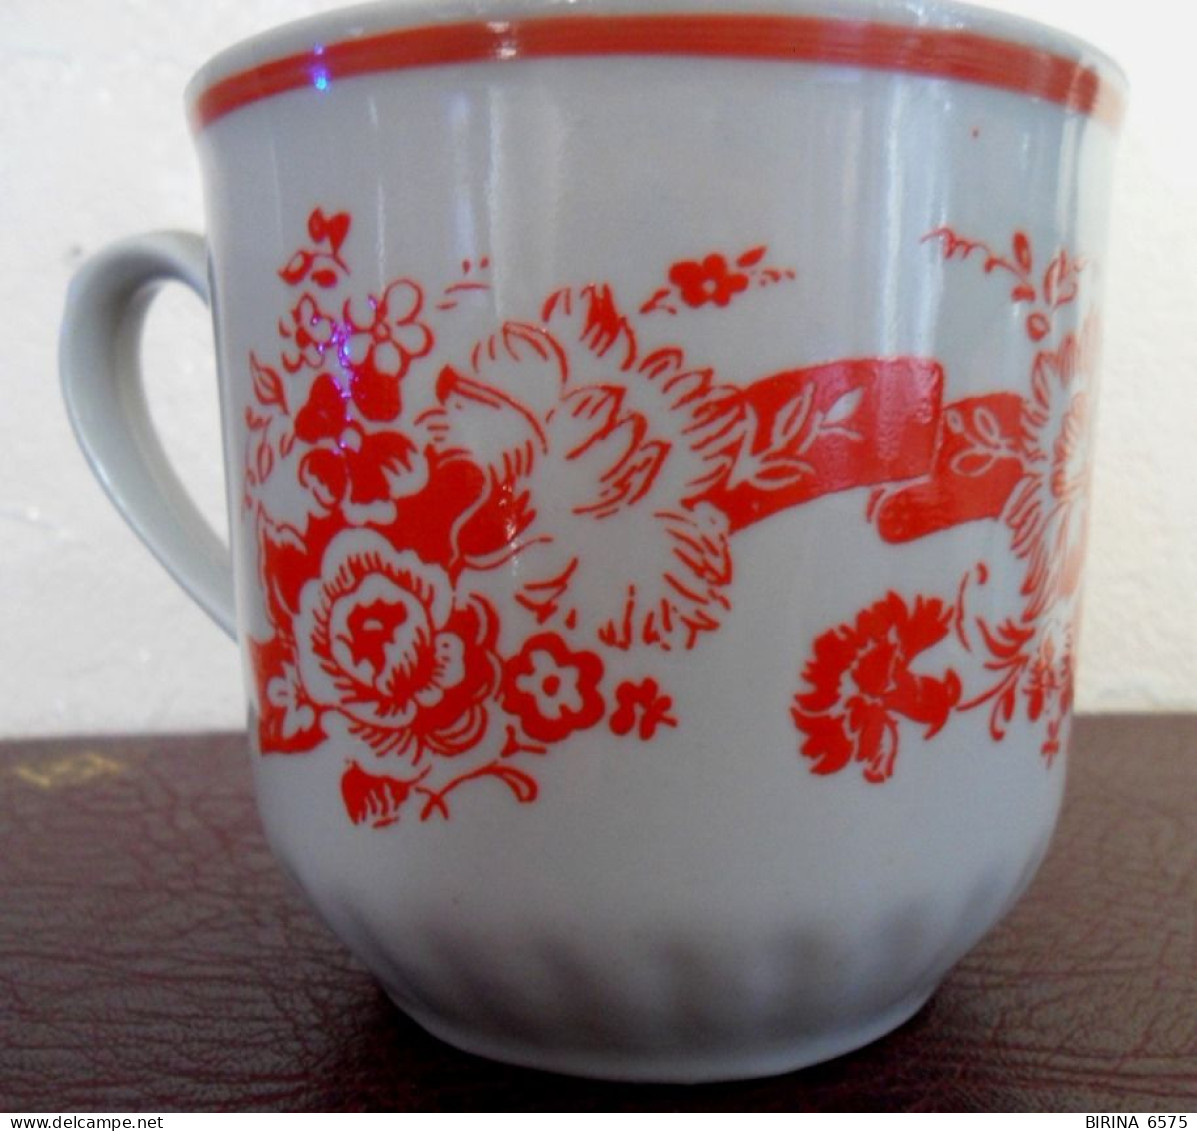 A Cup. Cup. Flowers. TERNOPIL PORCELAIN FACTORY. USSR. - 8-19-i - Tassen